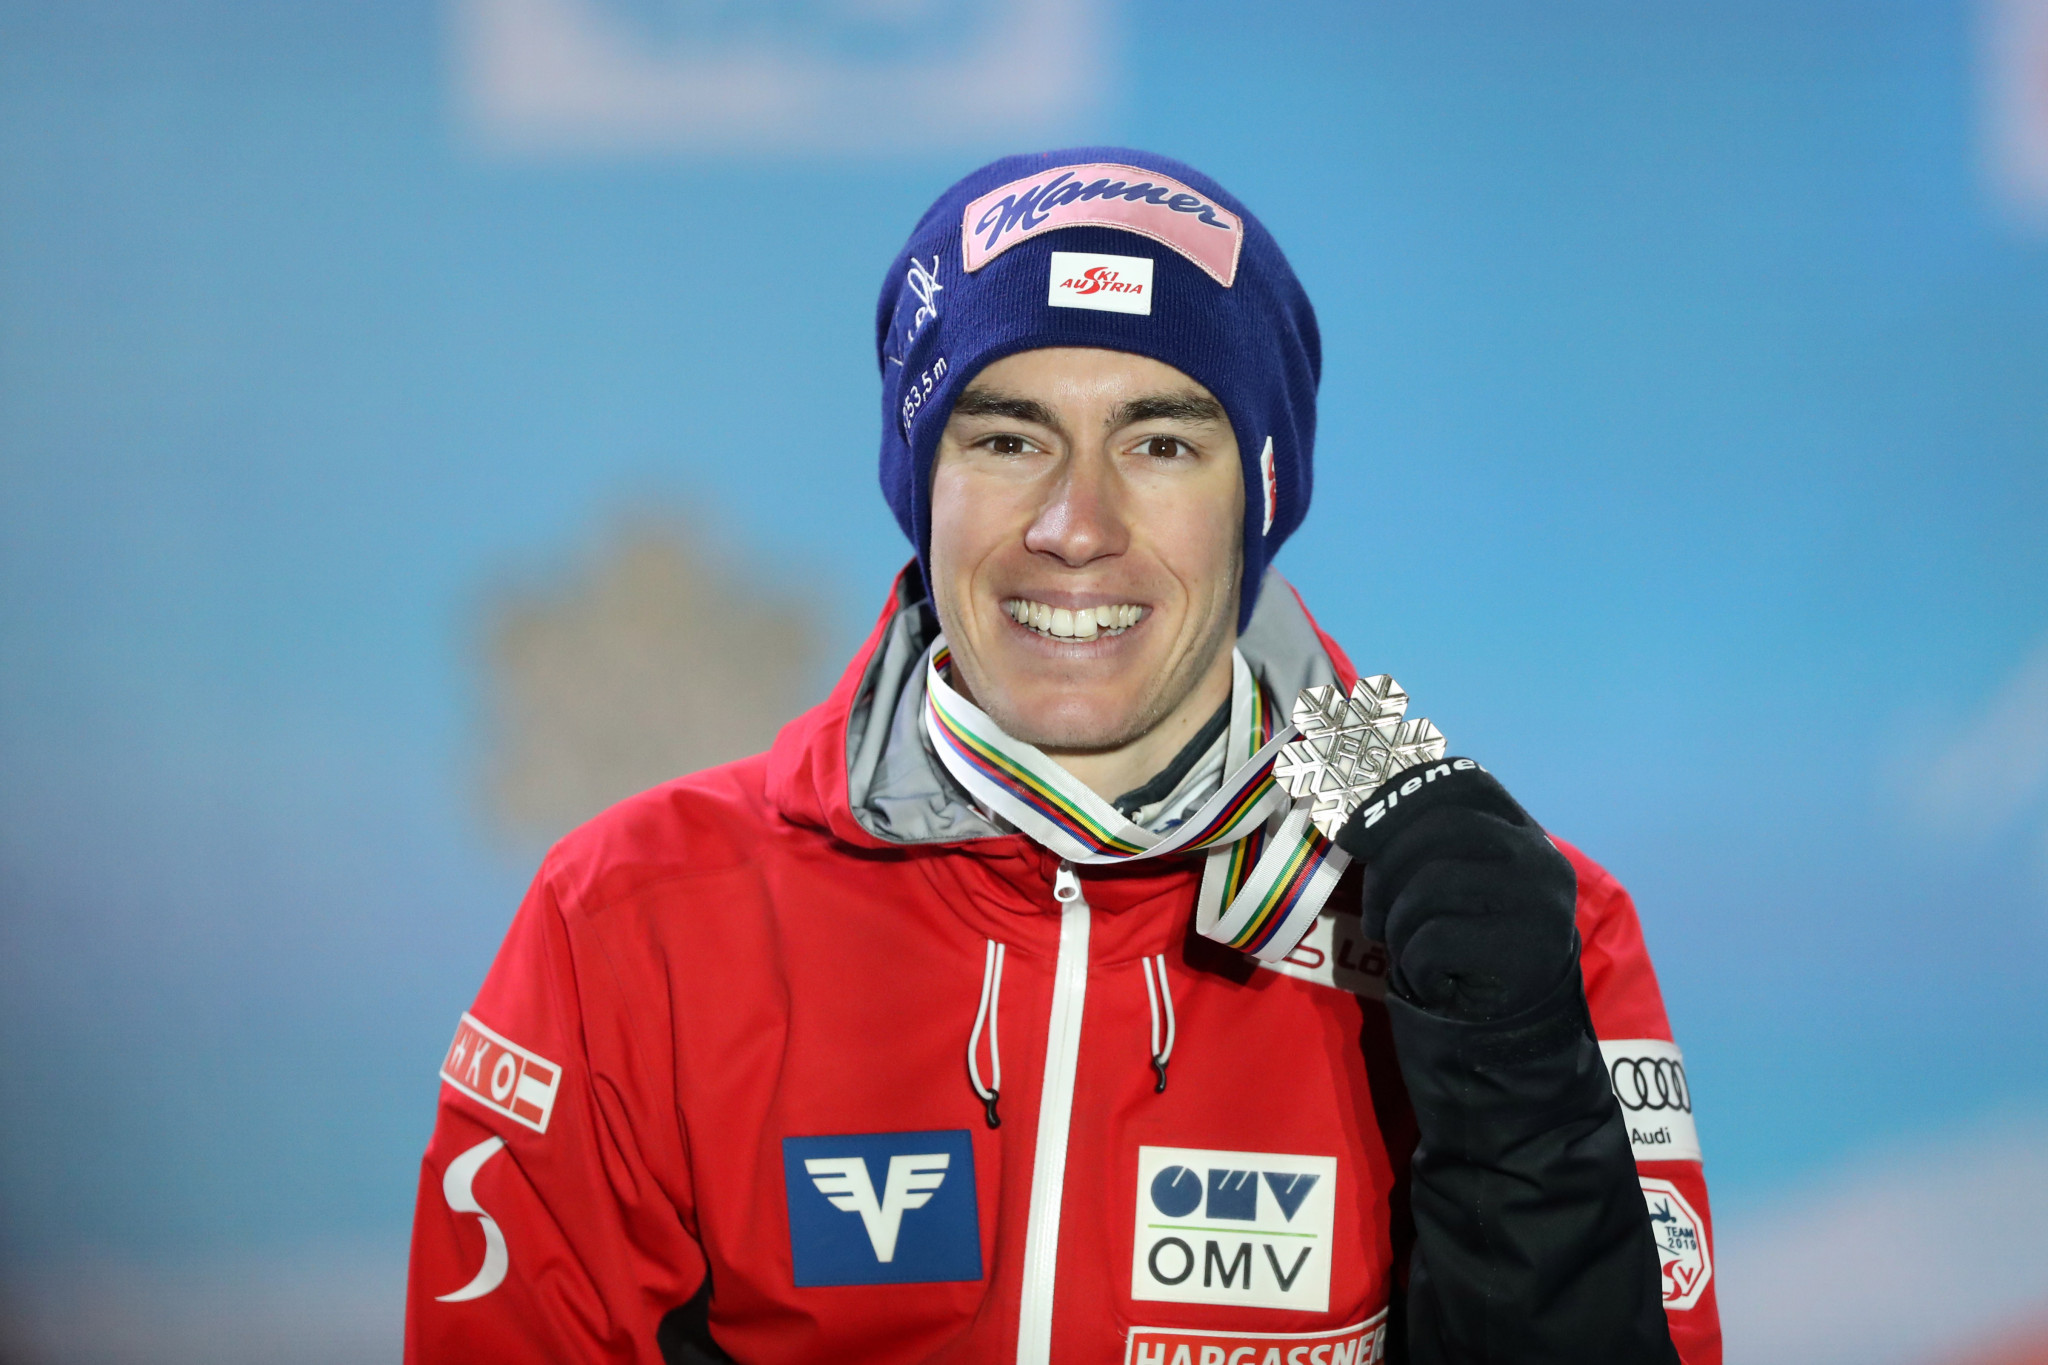 Kraft and Geiger continue FIS Ski Jumping World Cup battle in Sapporo